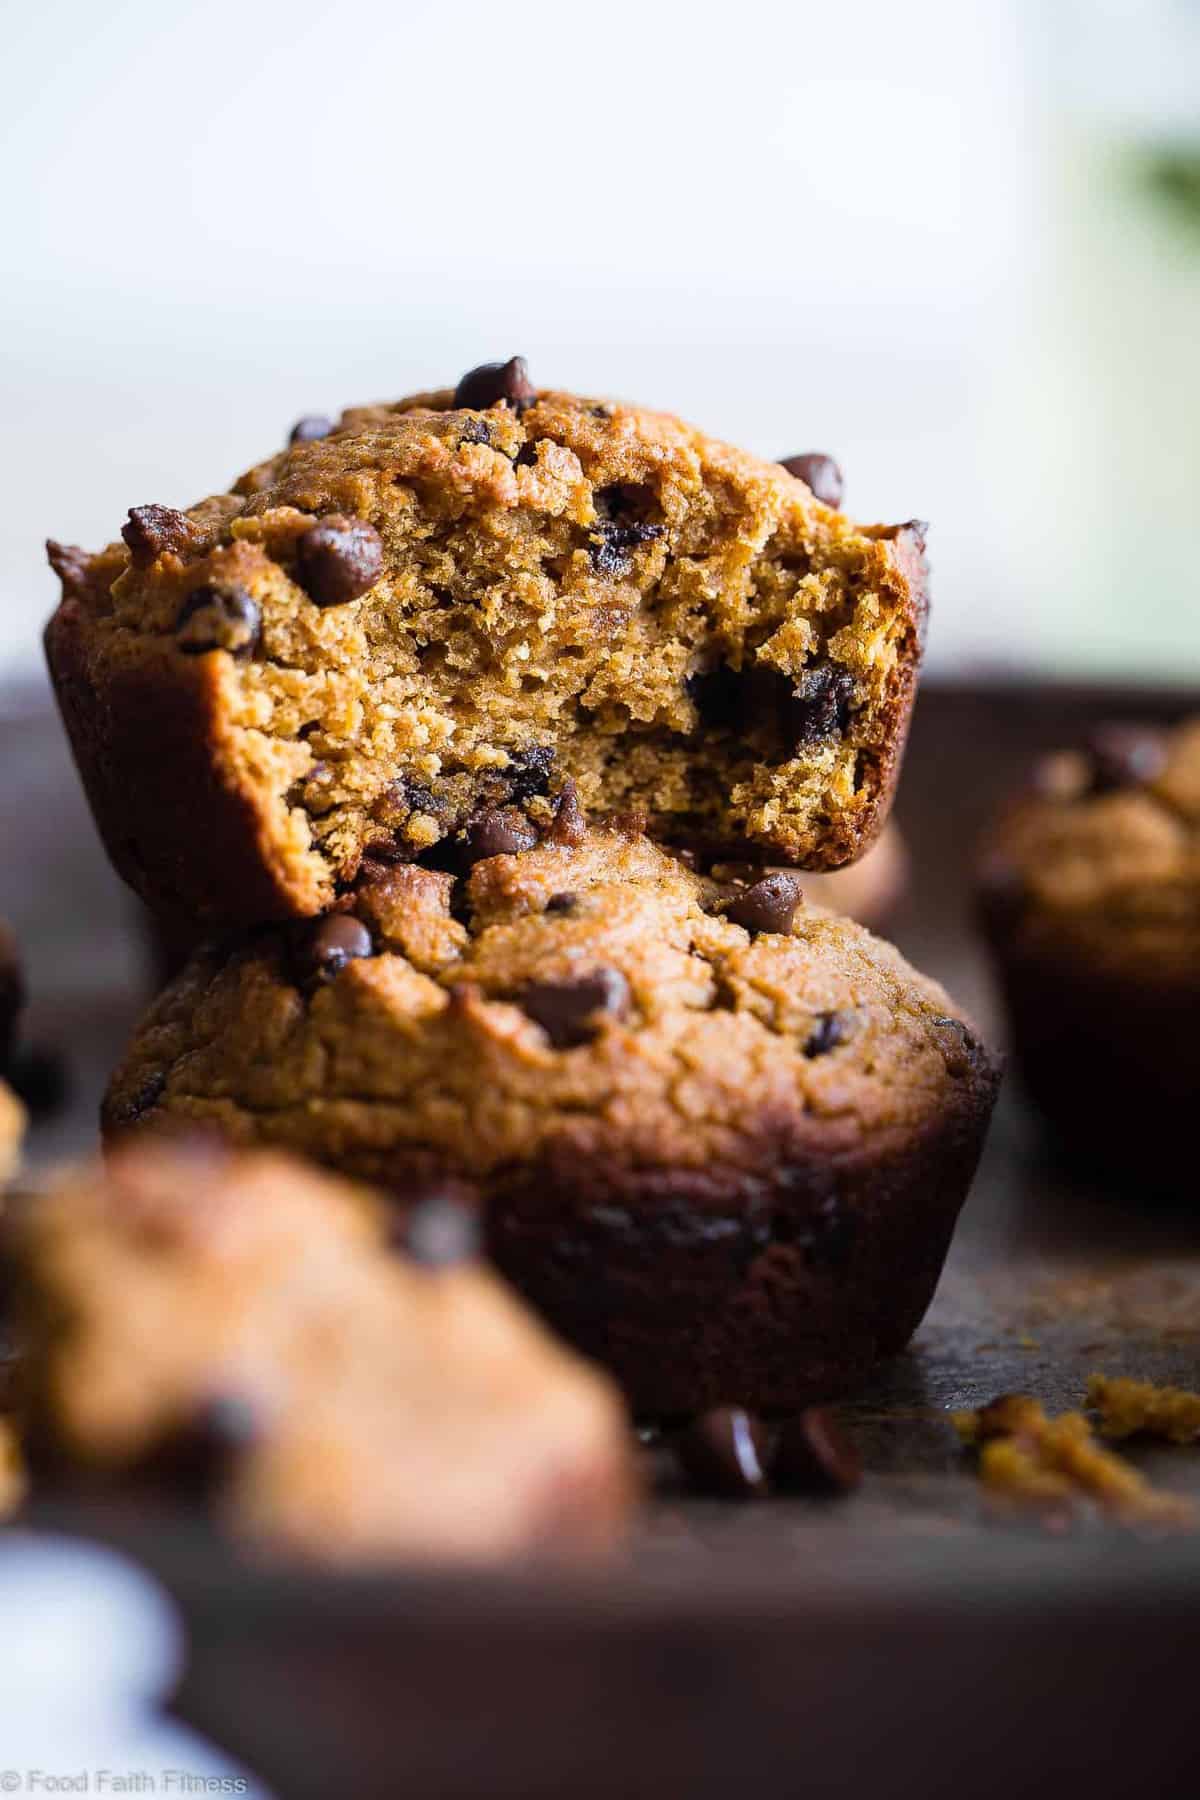 Gluten Free Spiced Chocolate Chip Sweet Potato Muffins - These healthy gluten free sweet potato muffins are packed with spicy-sweetness and lots of chocolate chips! Paleo friendly, made in one bowl and SO fluffy! | #Foodfaithfitness | #Glutenfree #Healthy #Paleo #Dairyfree #Muffins